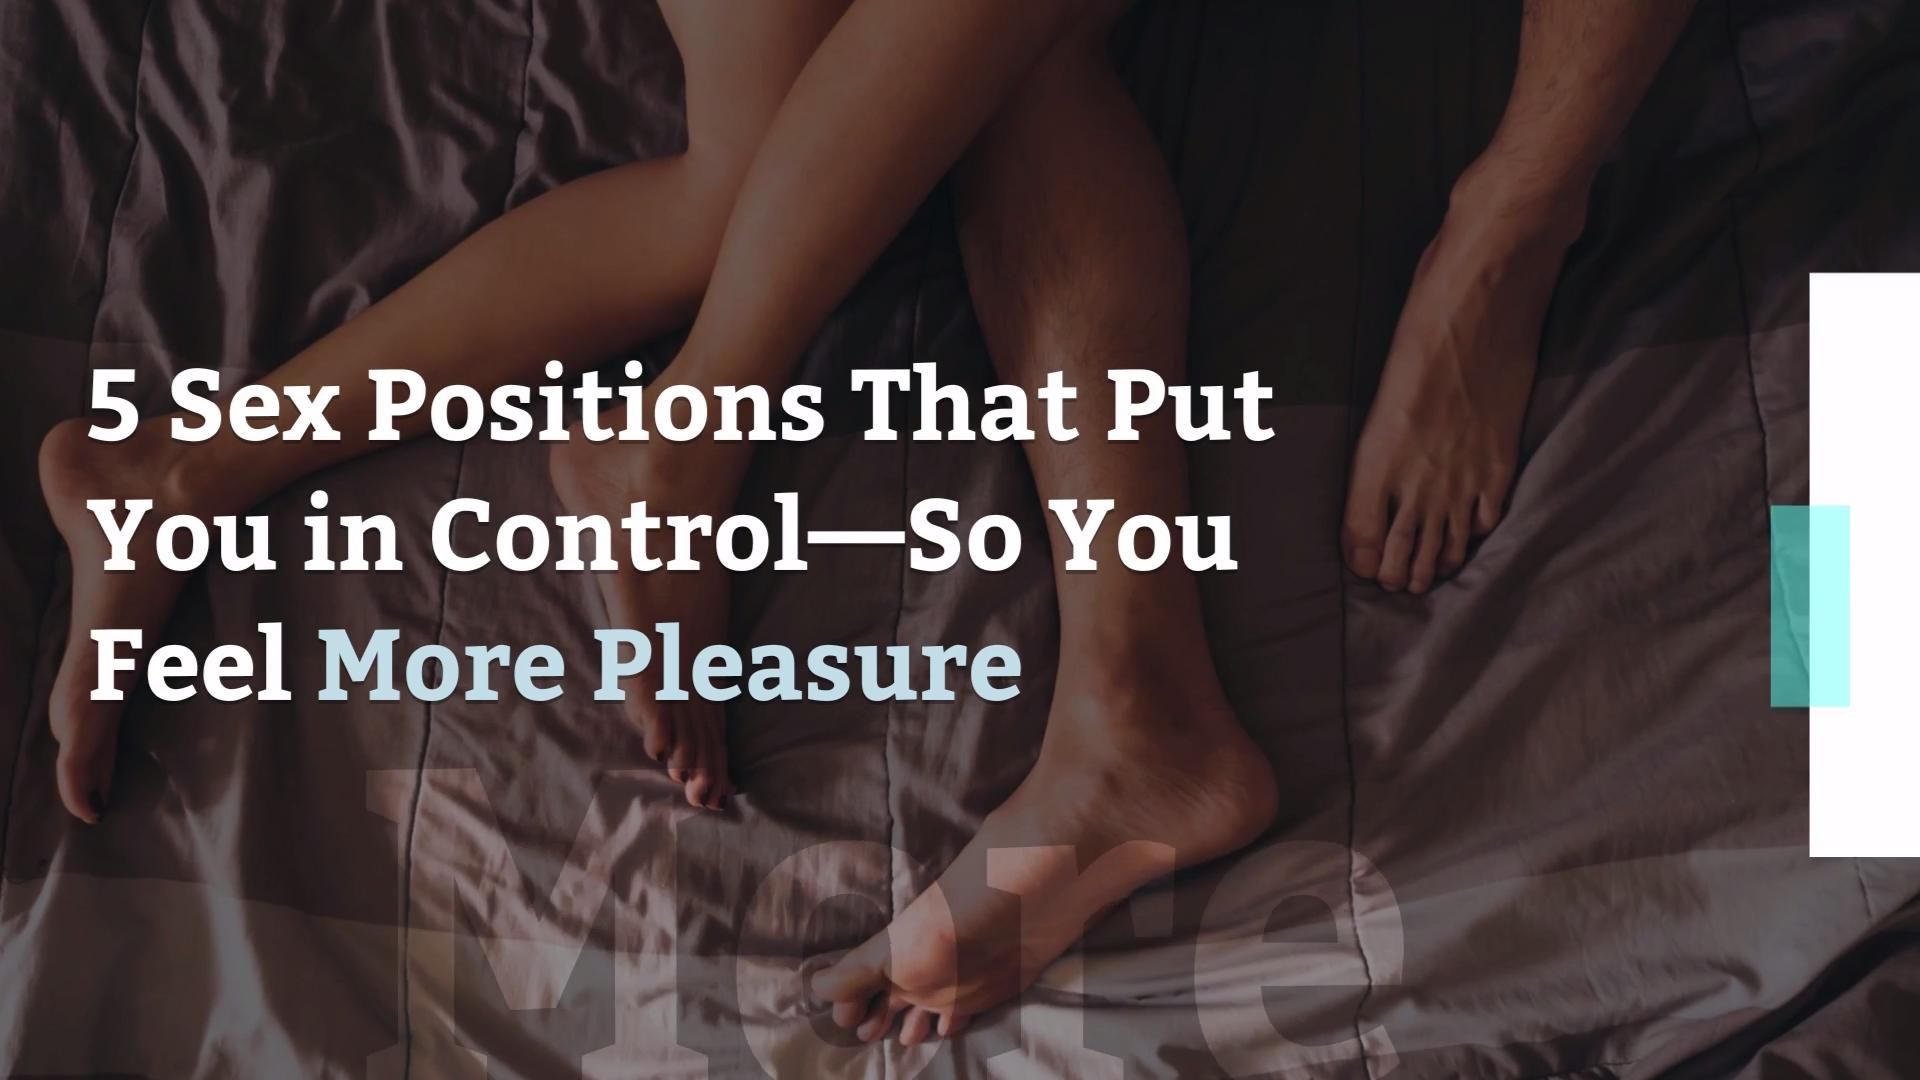 25 Best Kinky Sex Ideas To Try In 2022, According To Experts image